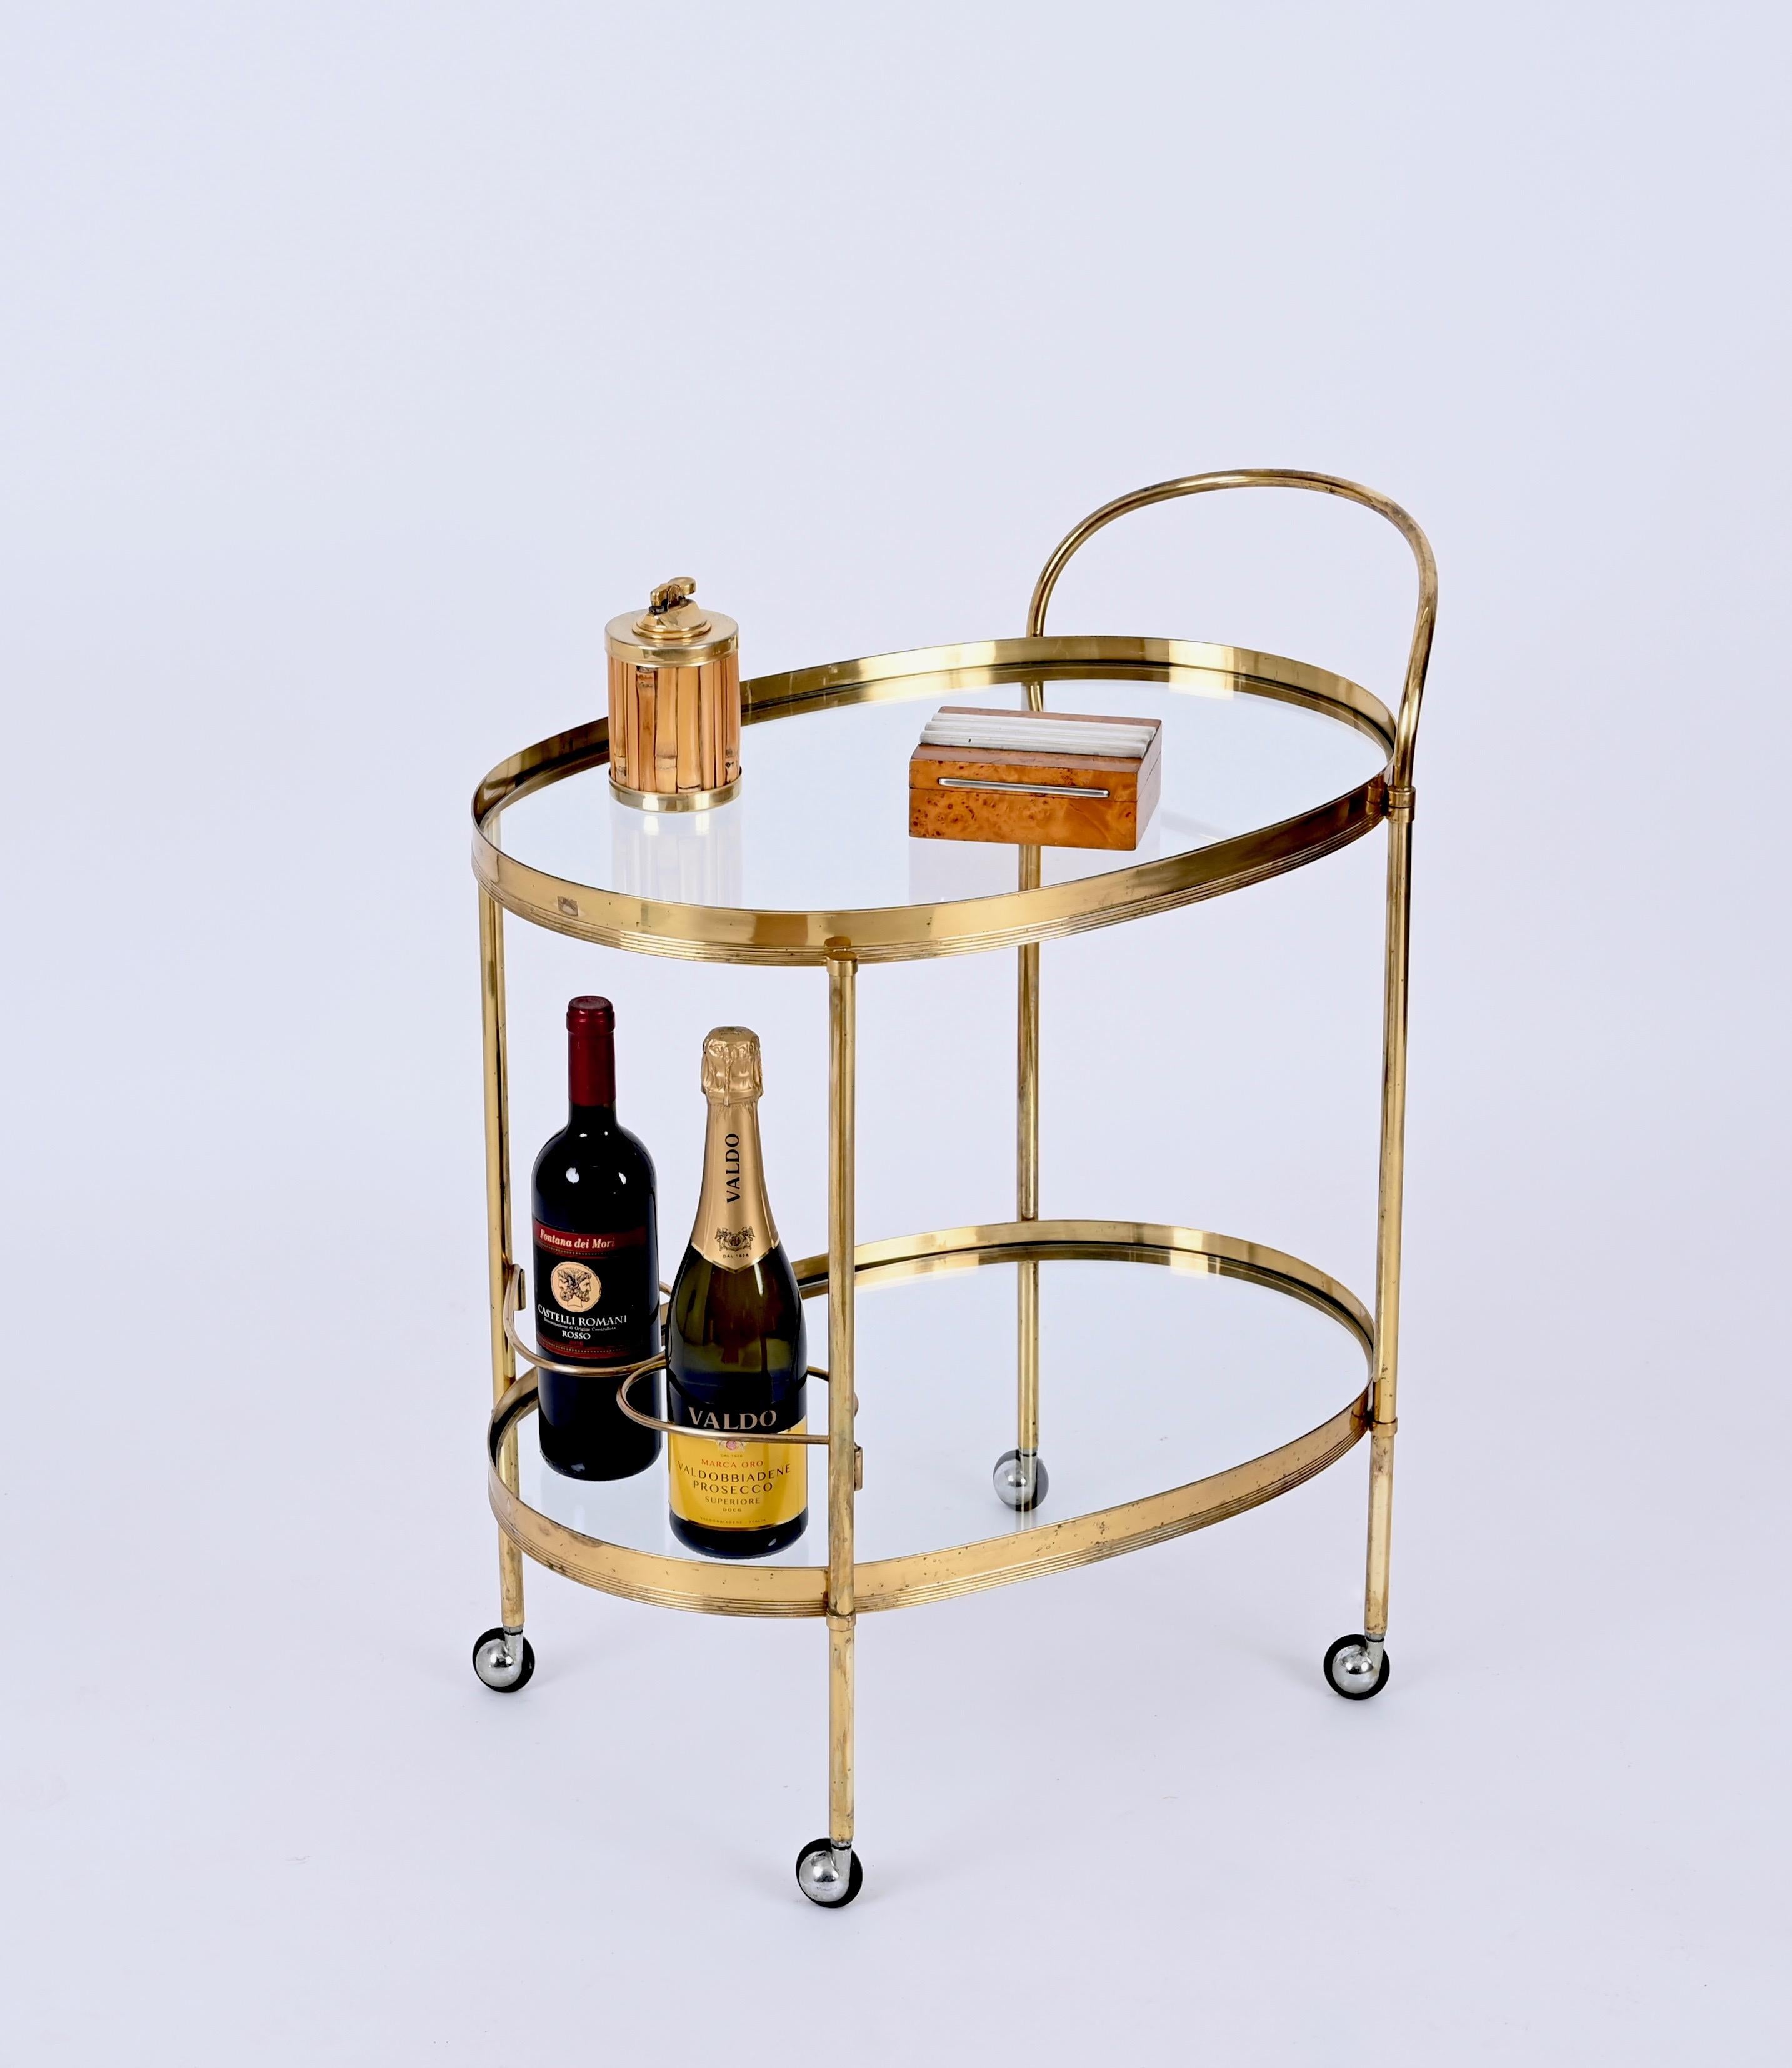 Magnificent mid-century brass and crystal glass bar trolley with bottle holder. This serving trolley was produced by the Maison Jansen in France during the 1970s.

The piece has tow crystalglass shelves, one on the top and one on the bottom, and